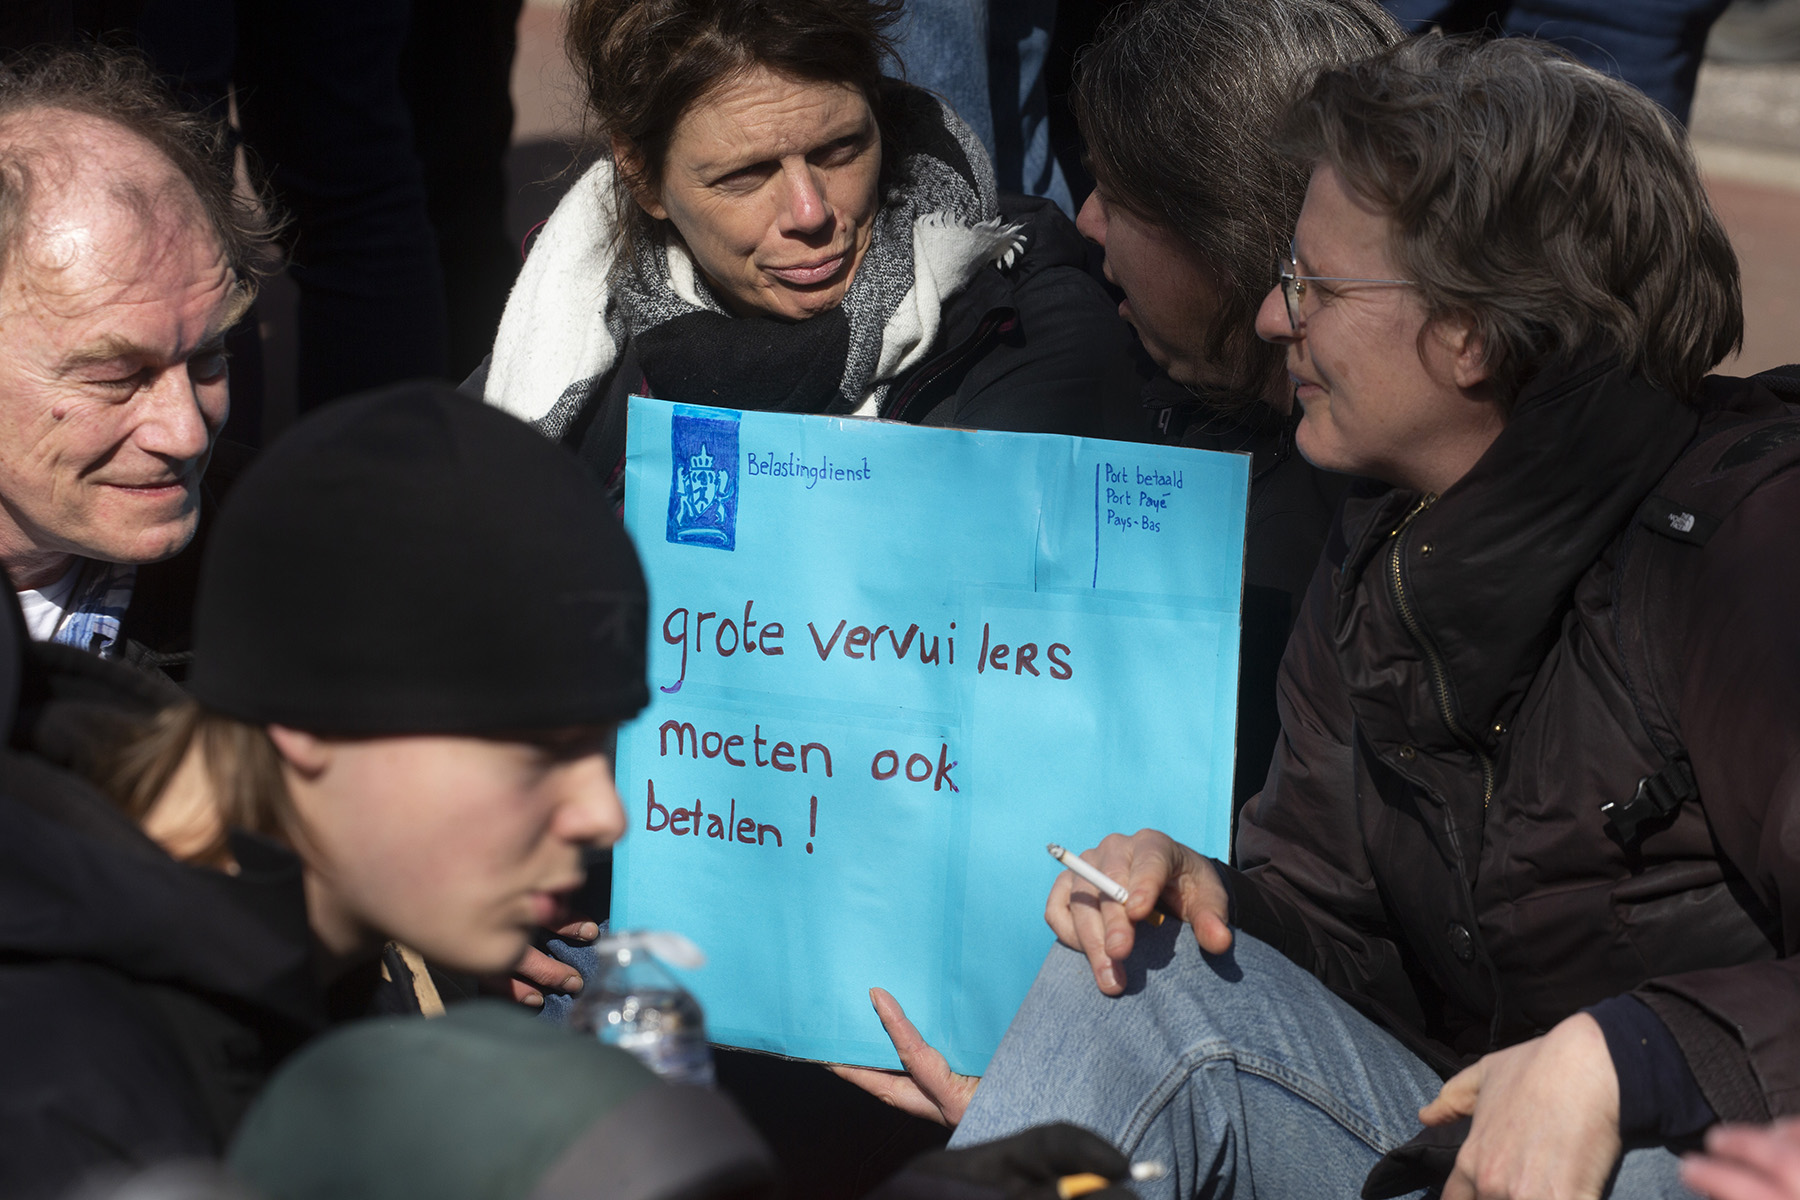 Protesters hold a sign in the form of a blue envelope saying "big polluters have to pay tax too" during an Extinction Rebellion protest against fossil fuel subsidies. The blue envelop is a symbol for the Dutch Tax Office, which always sends (or used to send) their post in blue envelops.